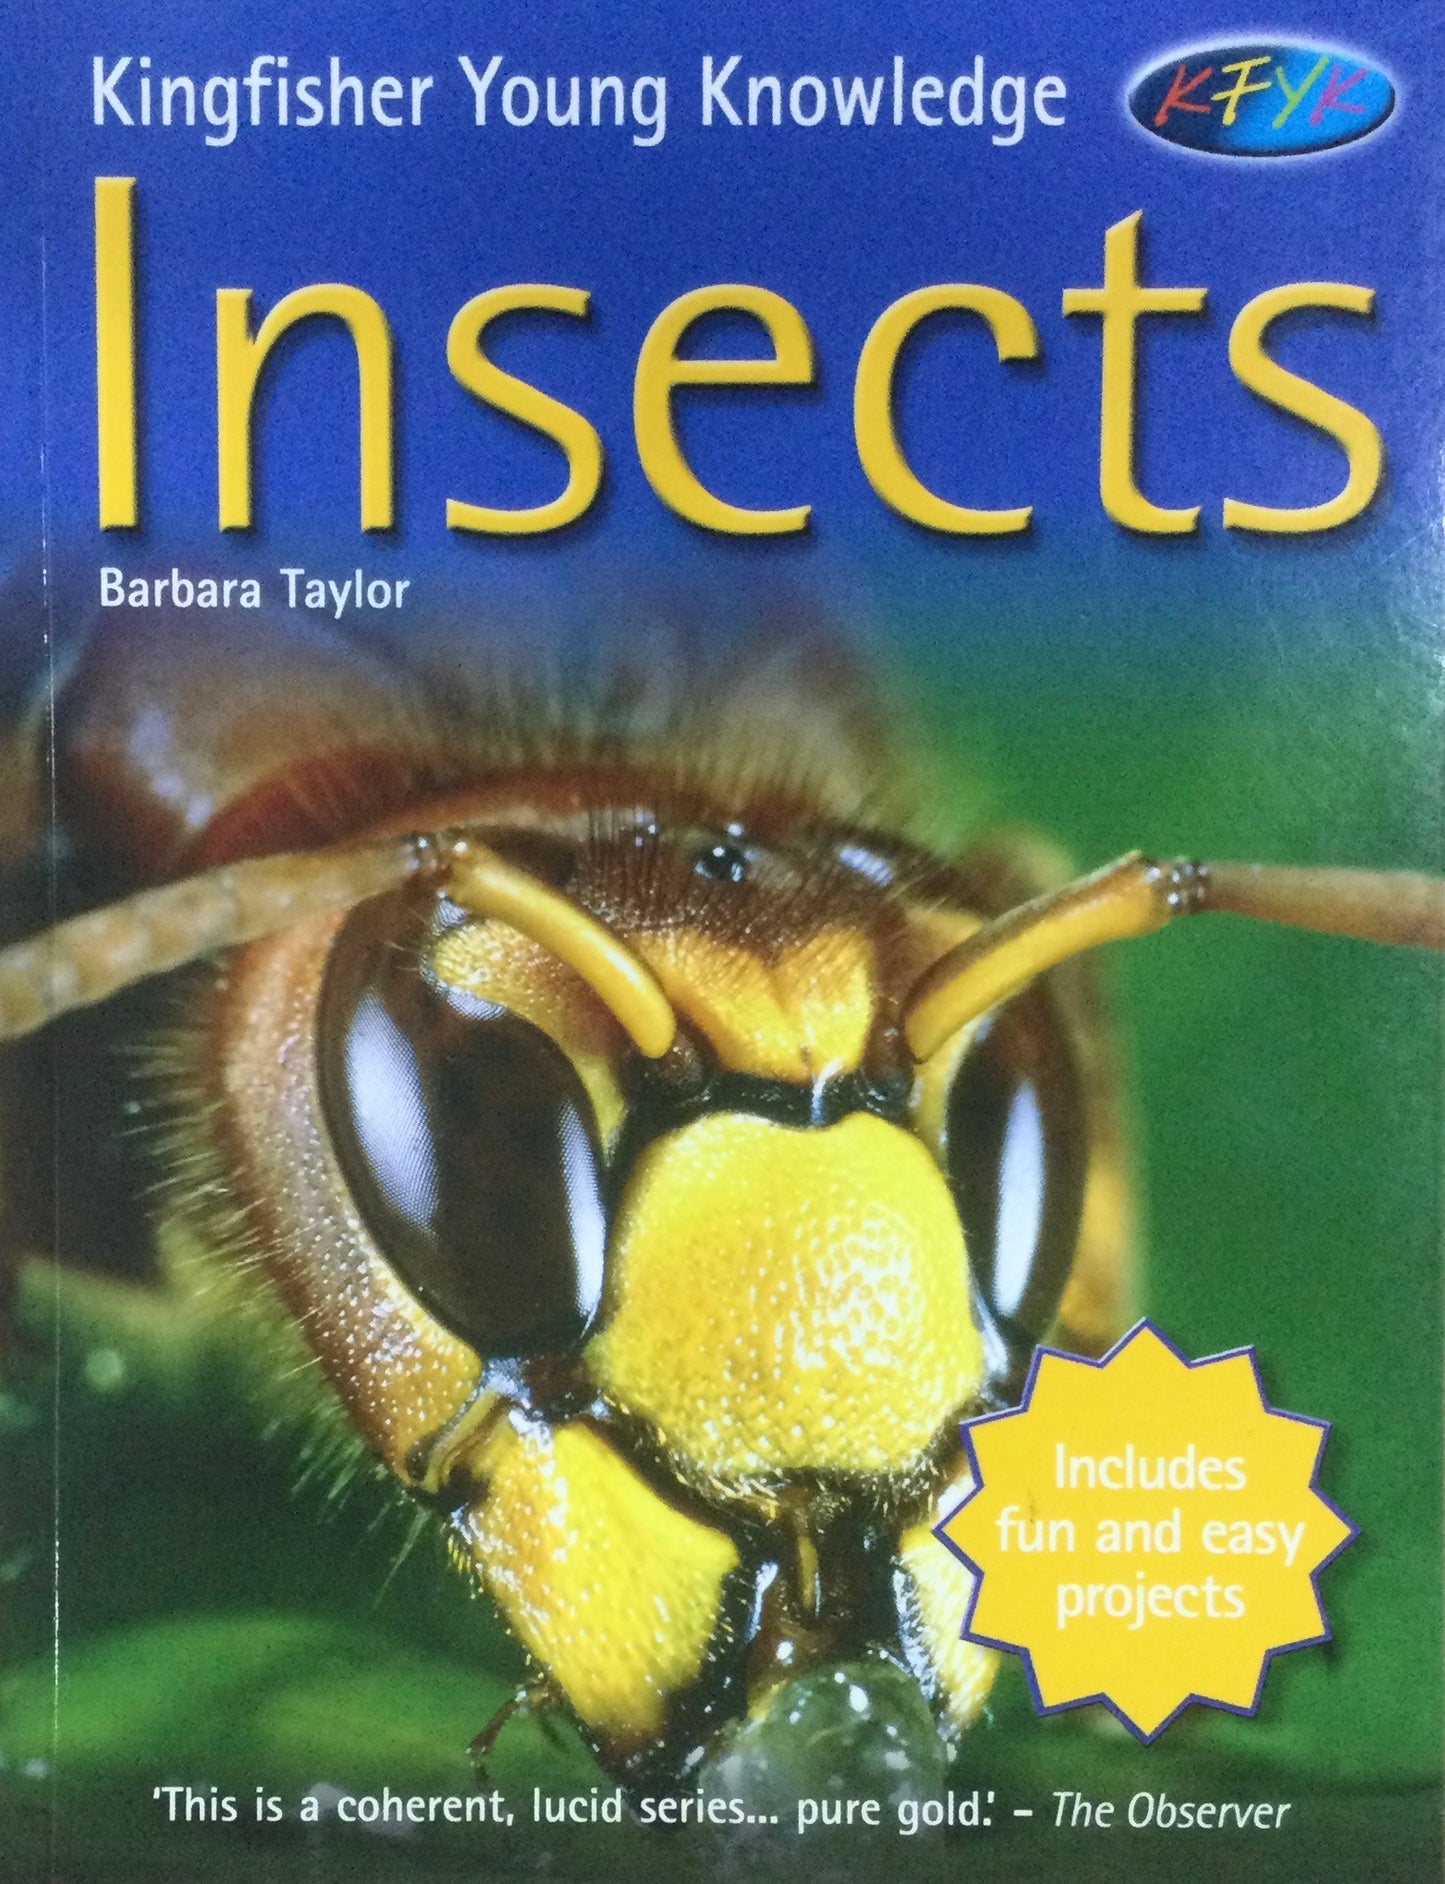 Insects, by Barbara Taylor (used)